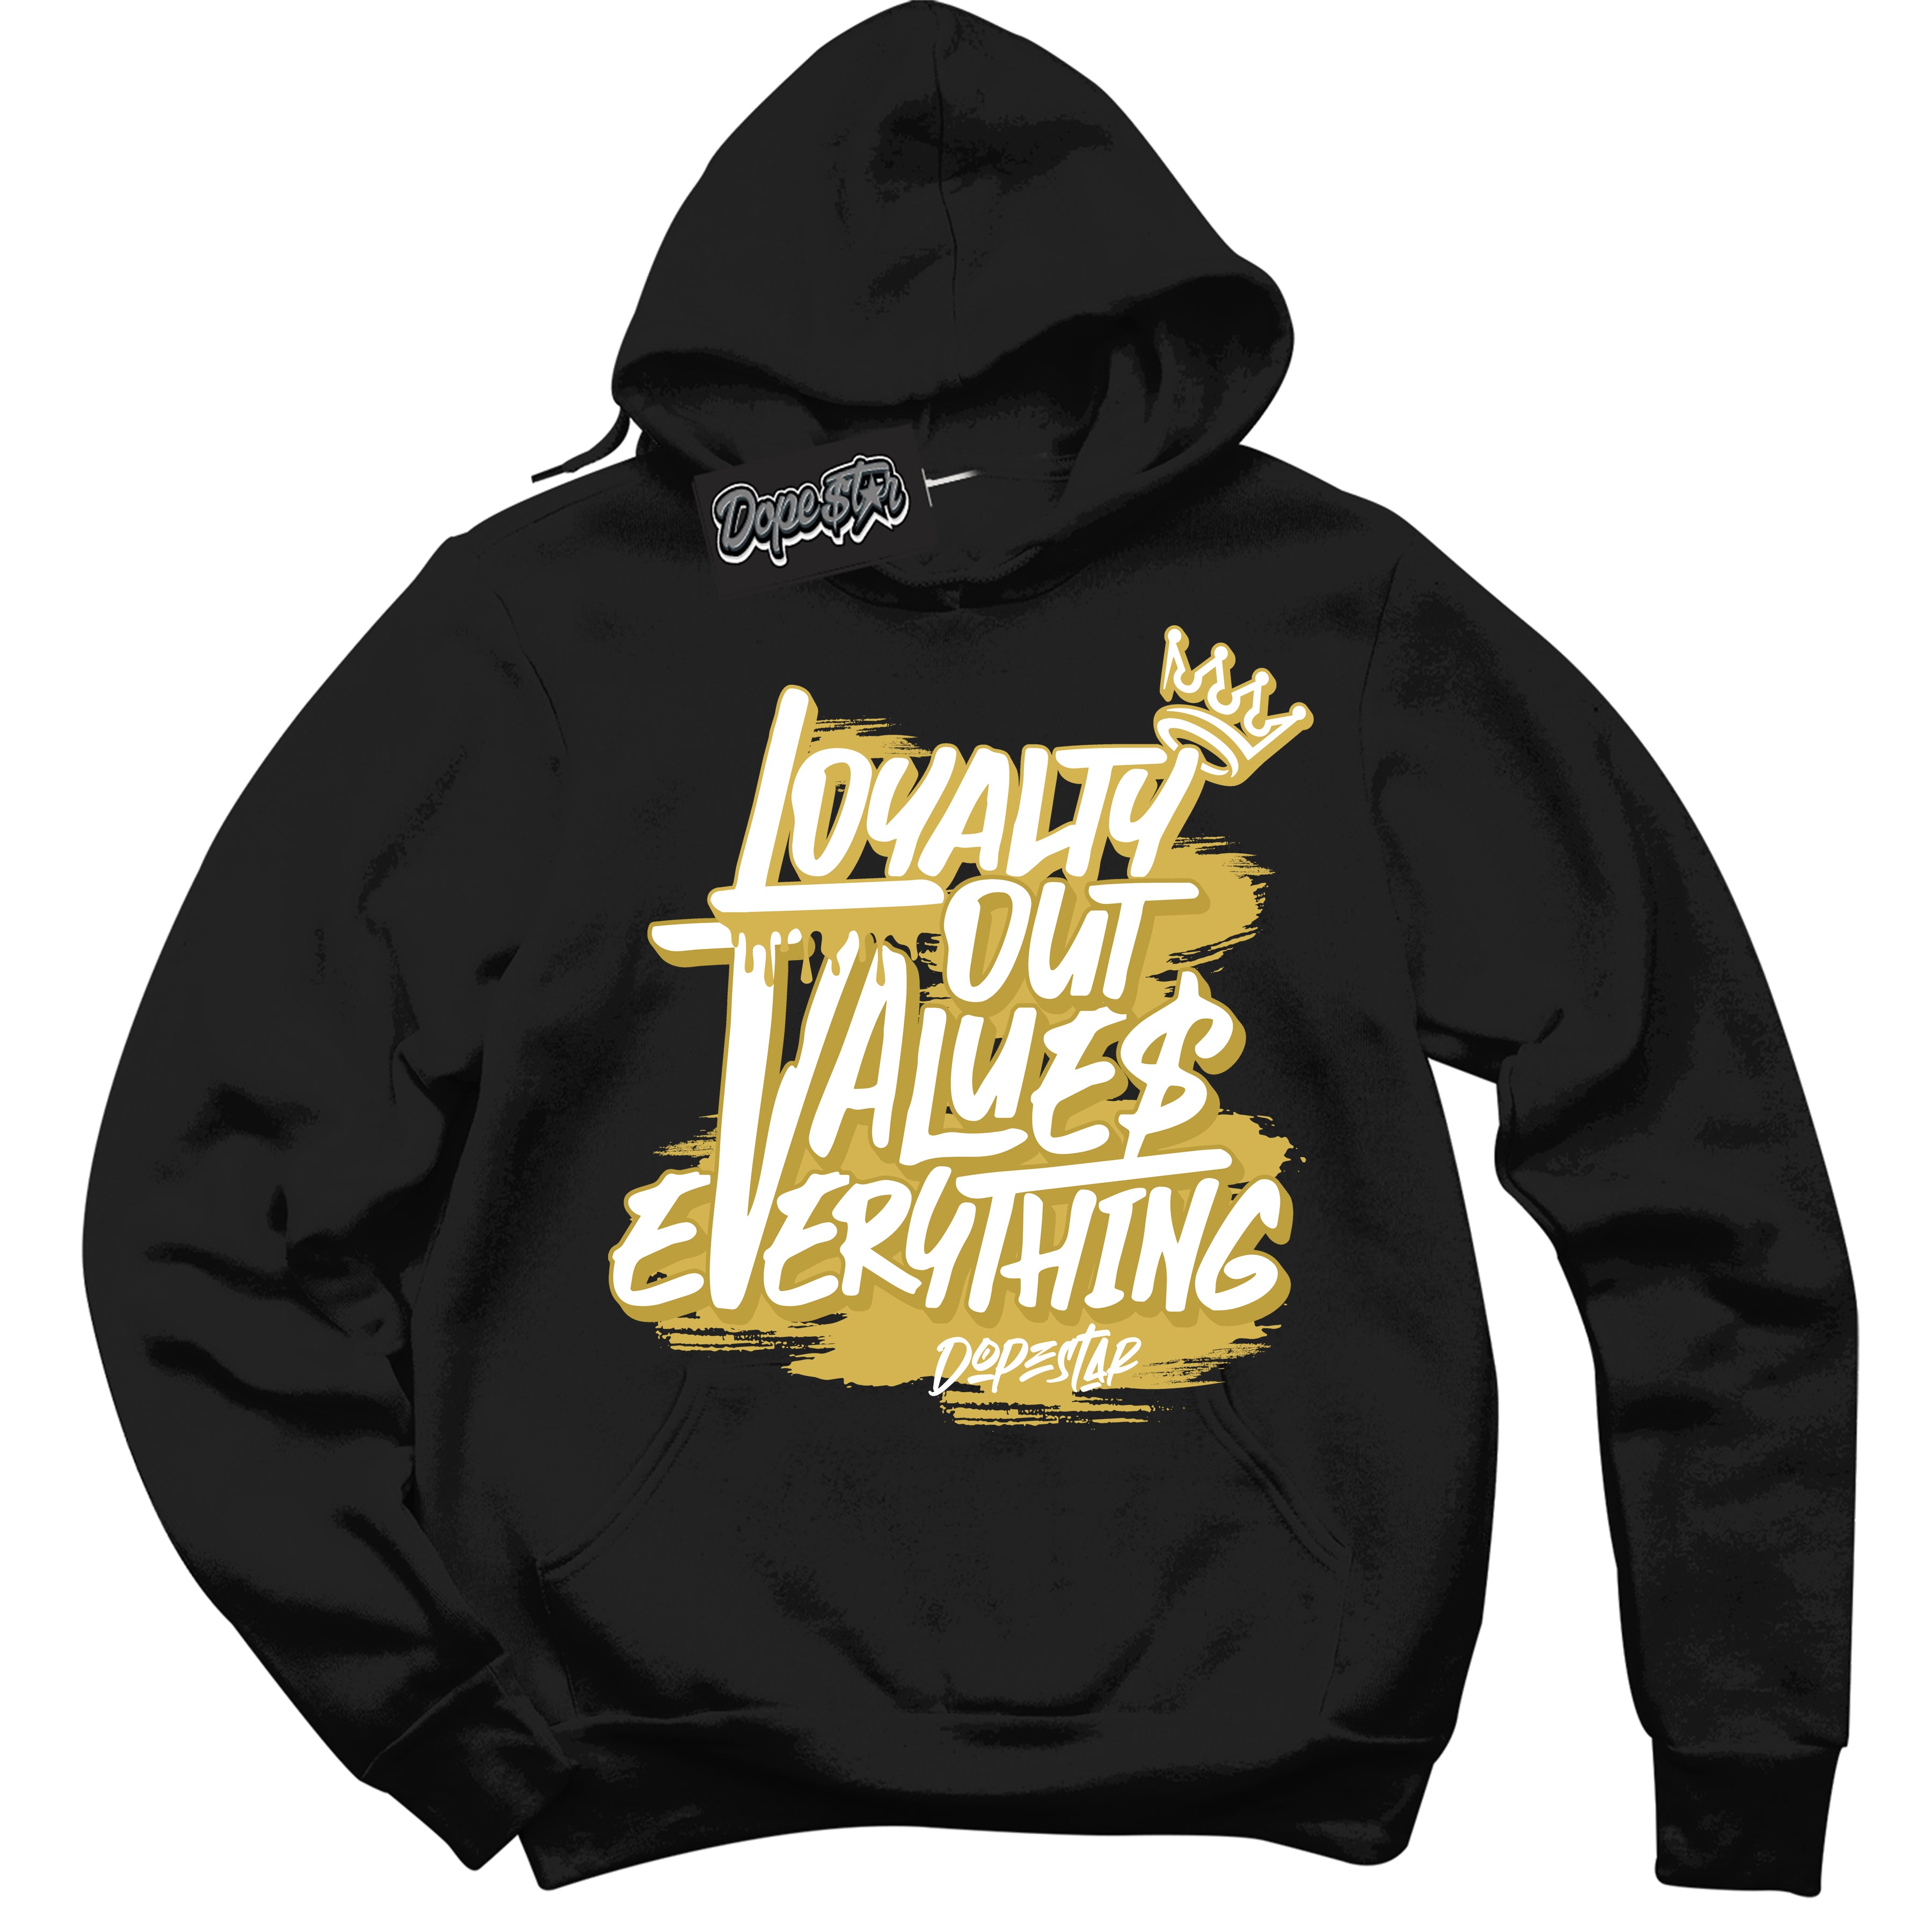 Cool Black Hoodie with “ Loyalty Out Values Everything ”  design that Perfectly Matches  Metallic Gold 4s Sneakers.